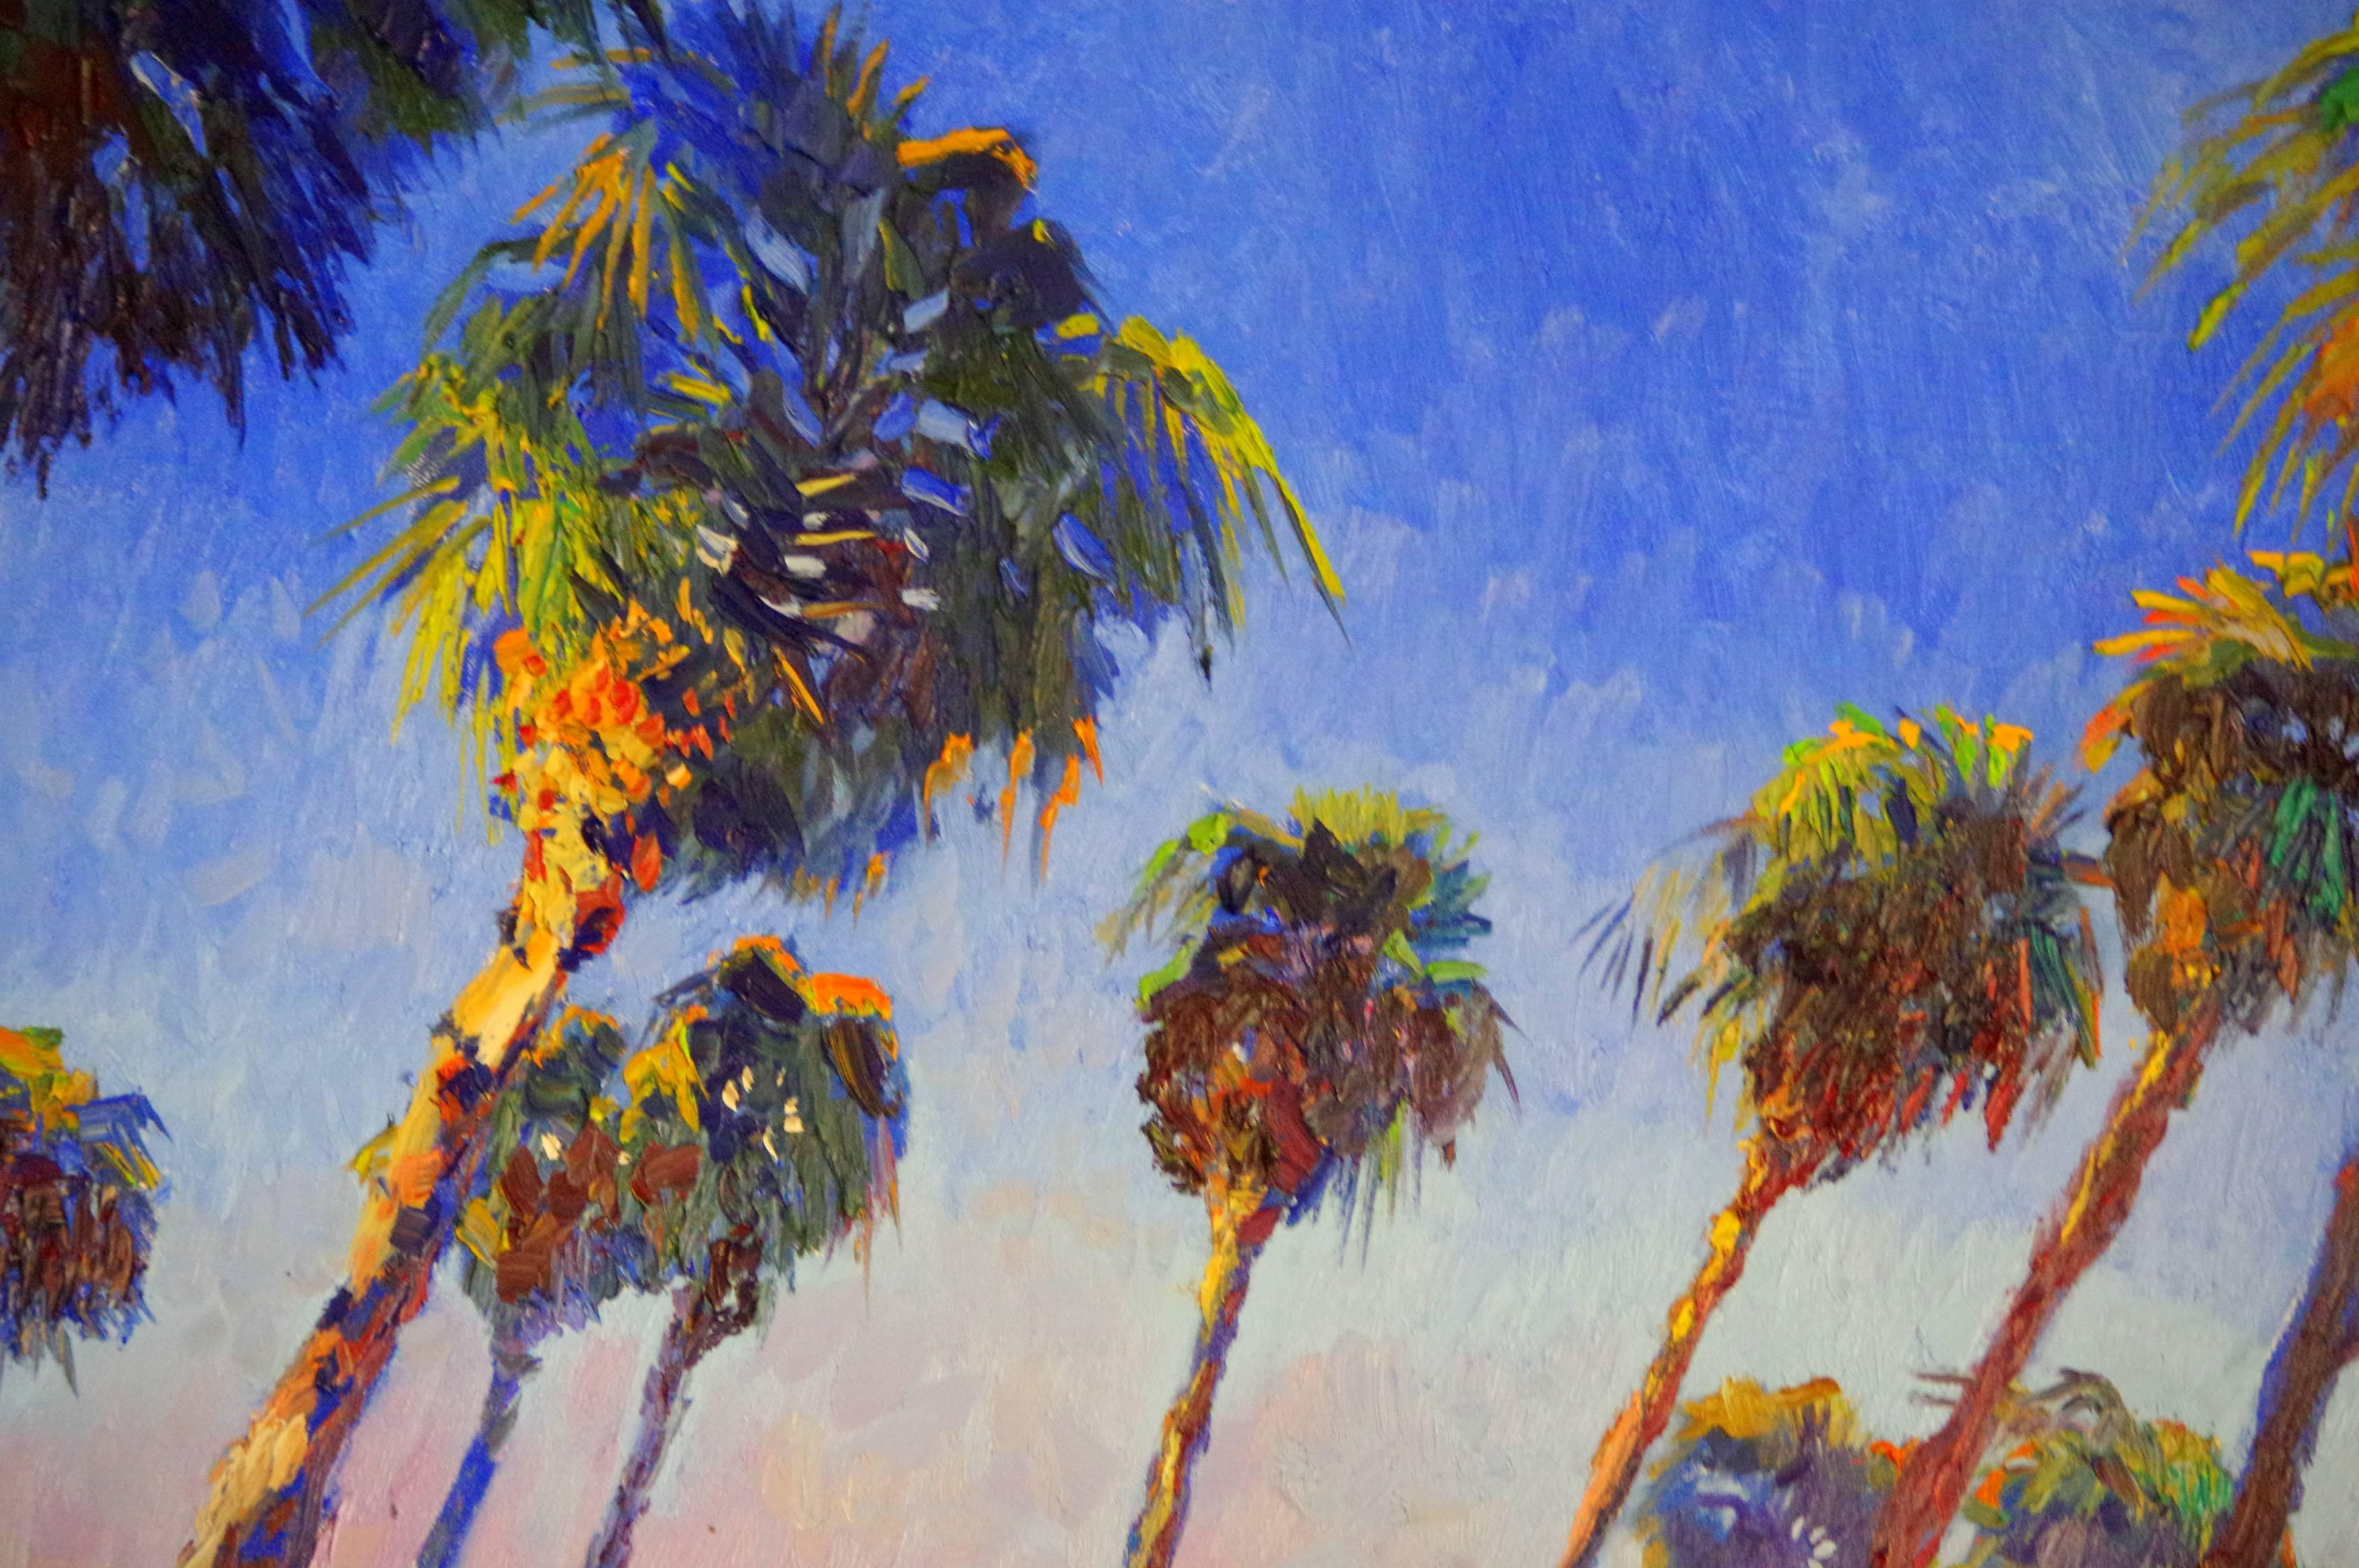 <p>Artist Comments<br> Palms always attract me with their elegant outlines. When the sky is bright blue, the beauty of these trees becomes more vivid. I used cobalt blue to express the deepness of the sky and provide an illusion of air surrounding